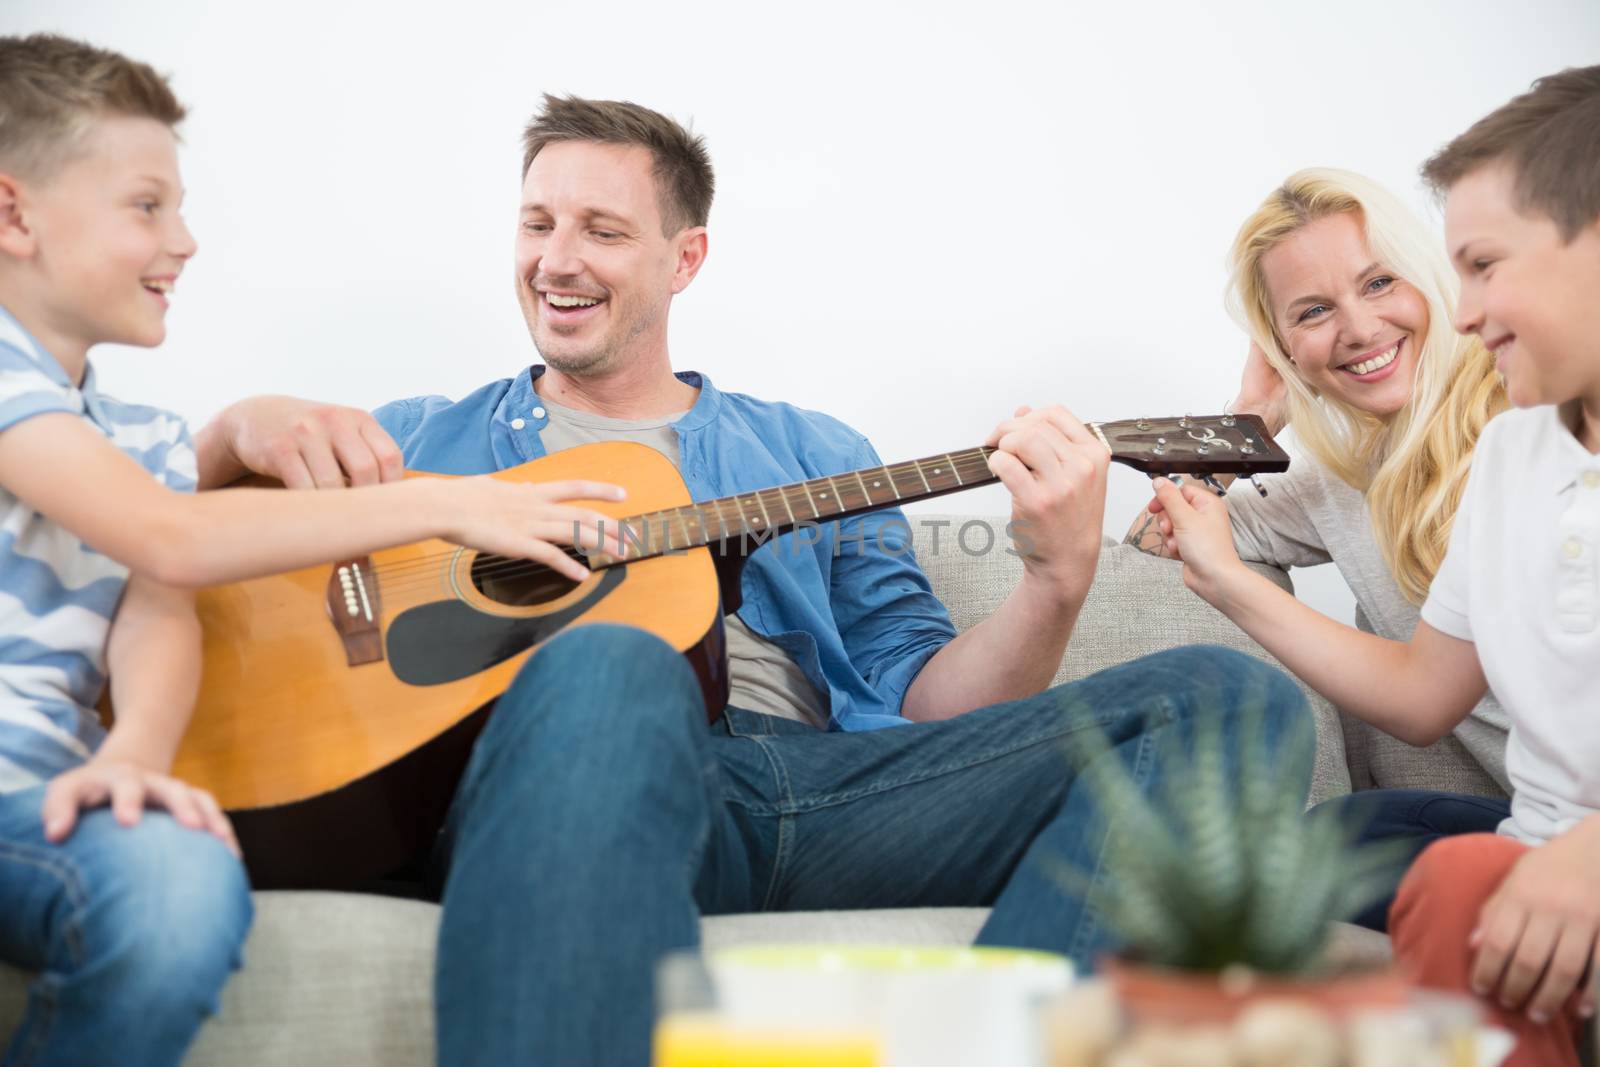 Happy caucasian family smiling while playing guitar and singing songs together at cosy modern home. Spending quality leisure time with children and family concept.